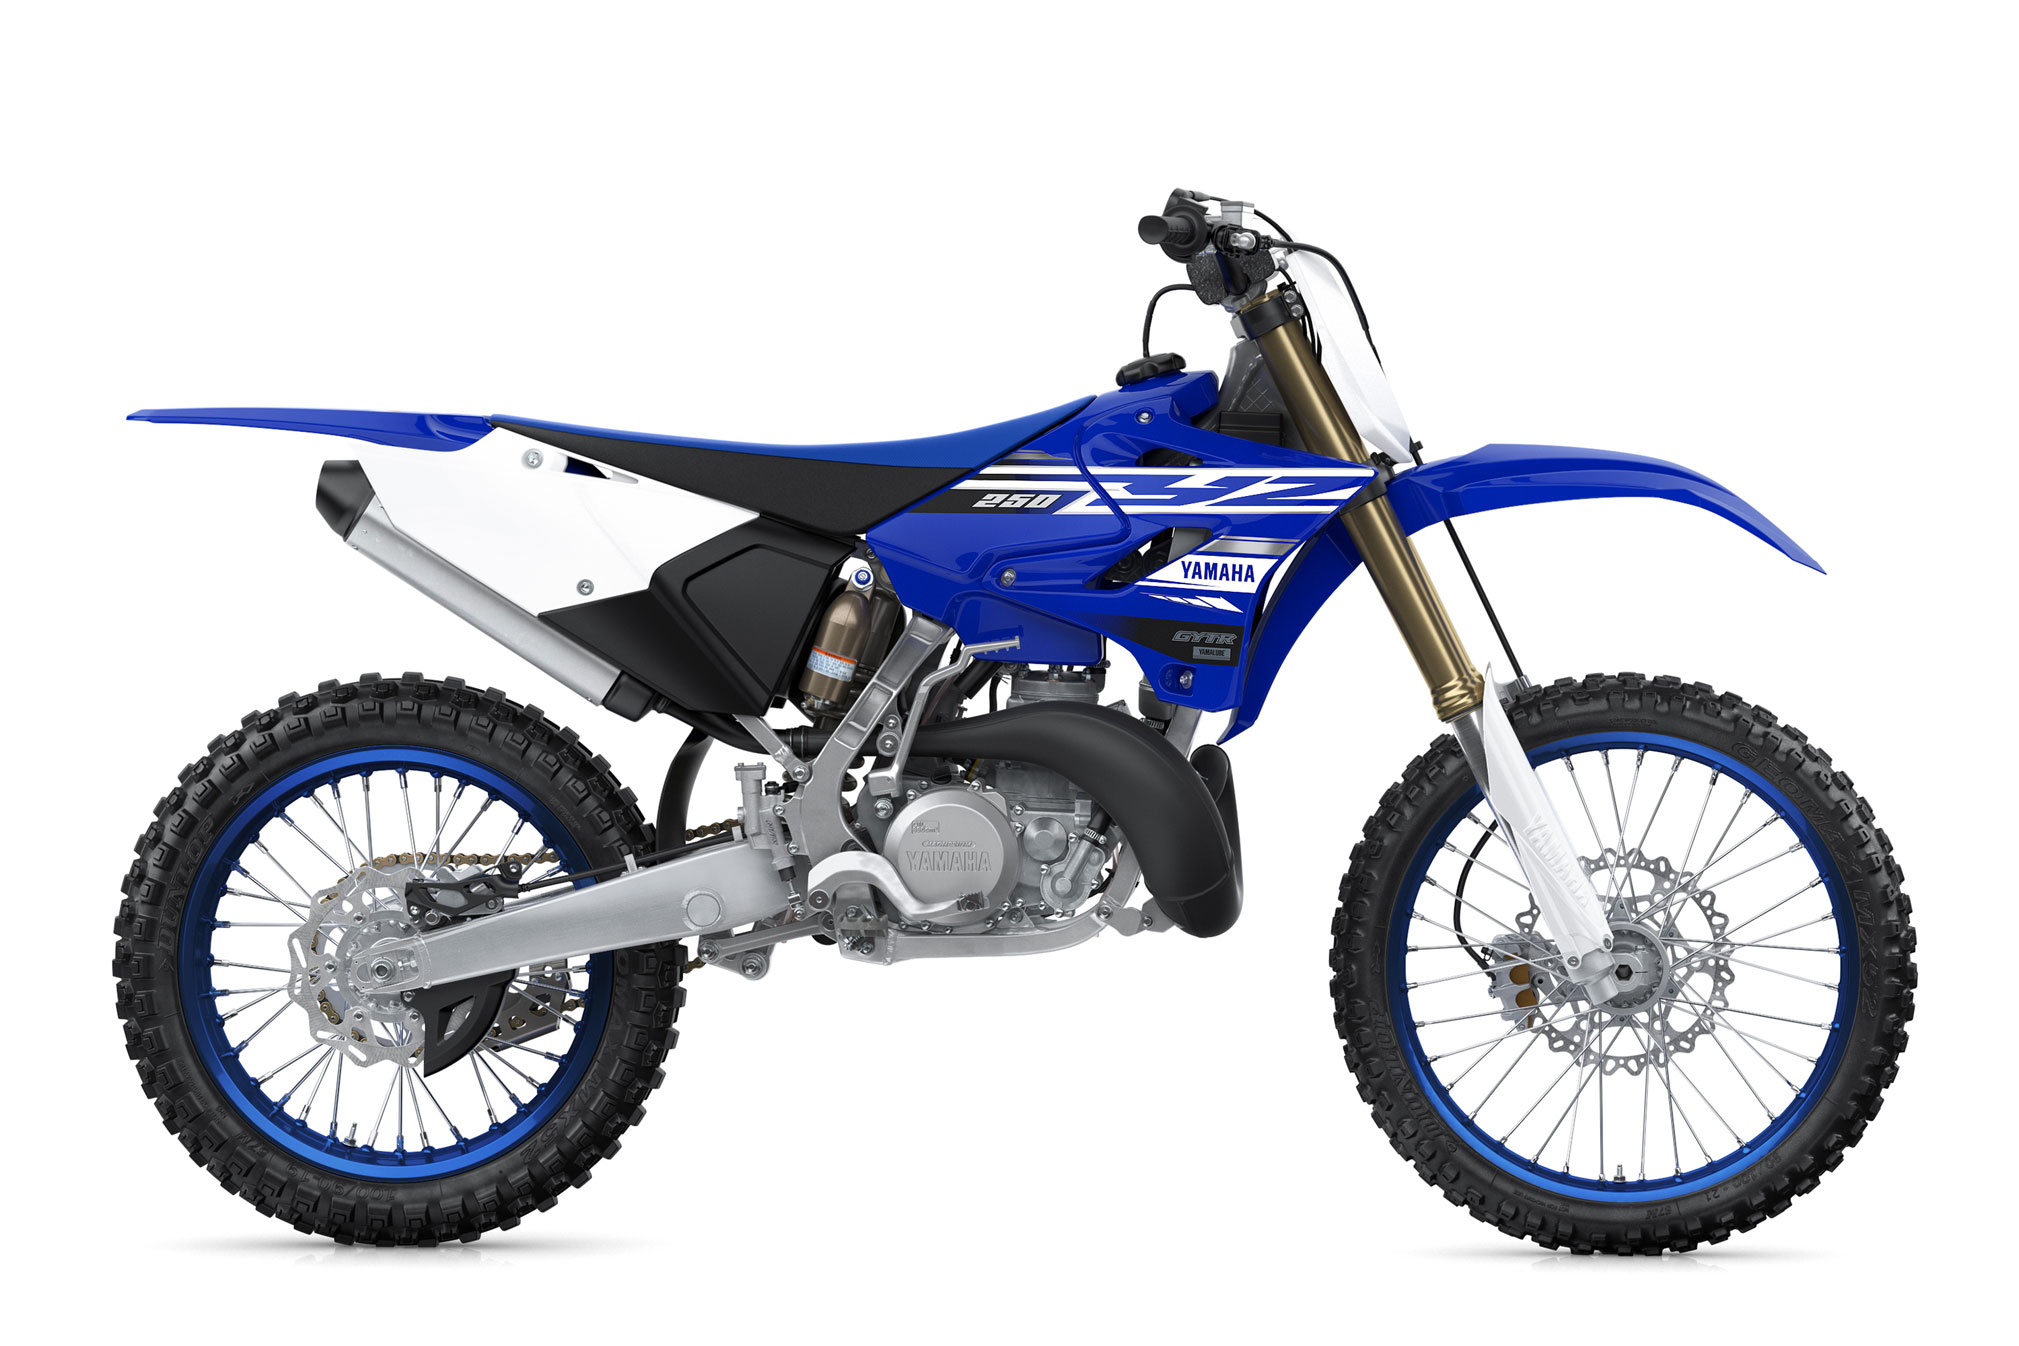 2018 Yamaha YZ250 Review | Why Change a Good Thing?